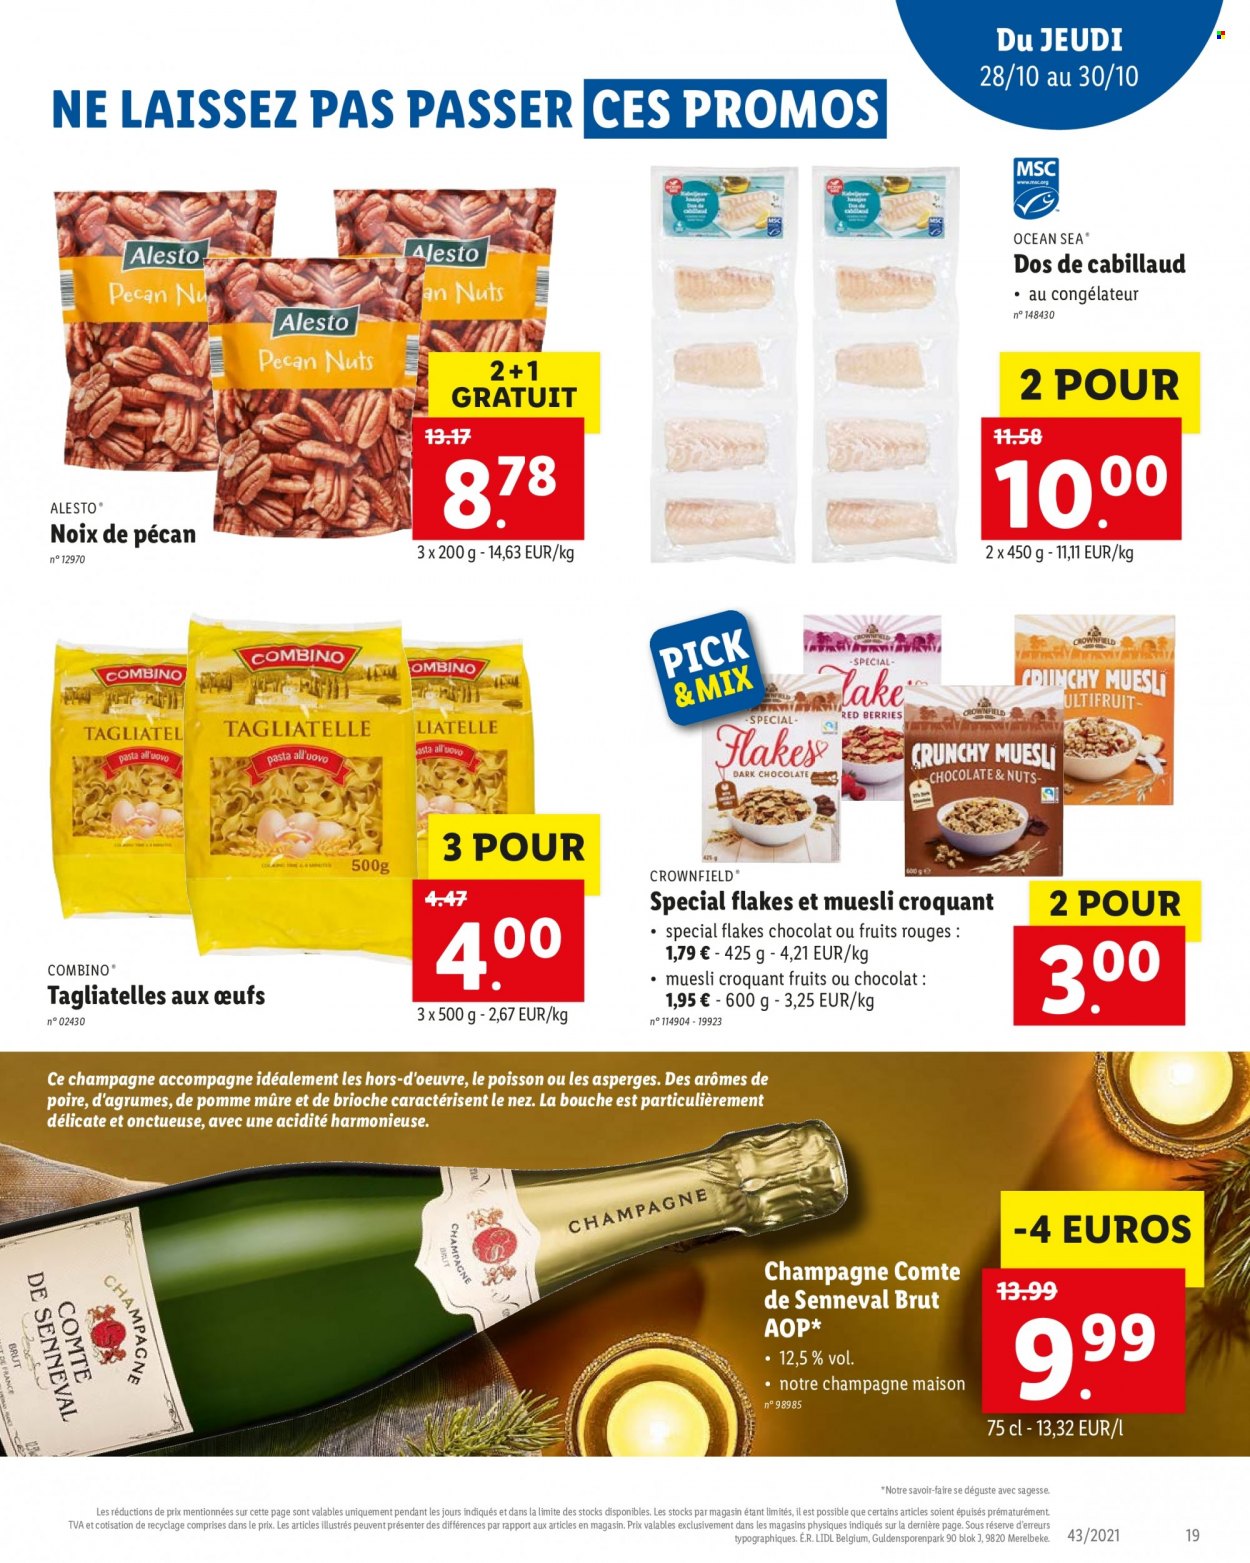 Catalogue Lidl - 25.10.2021 - 30.10.2021. Page 19.